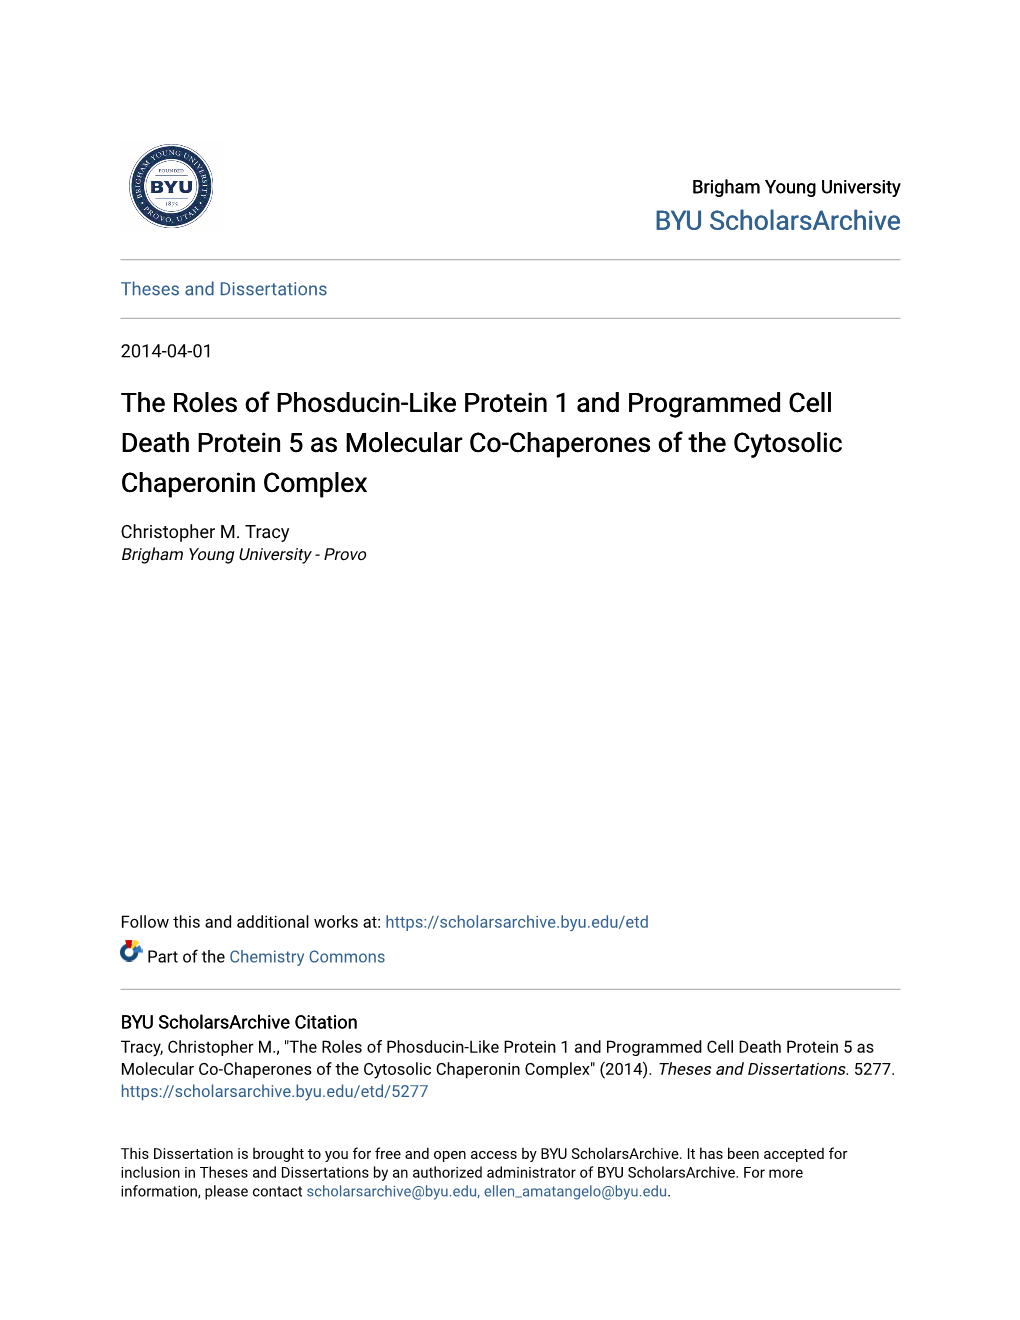 The Roles of Phosducin-Like Protein 1 and Programmed Cell Death Protein 5 As Molecular Co-Chaperones of the Cytosolic Chaperonin Complex